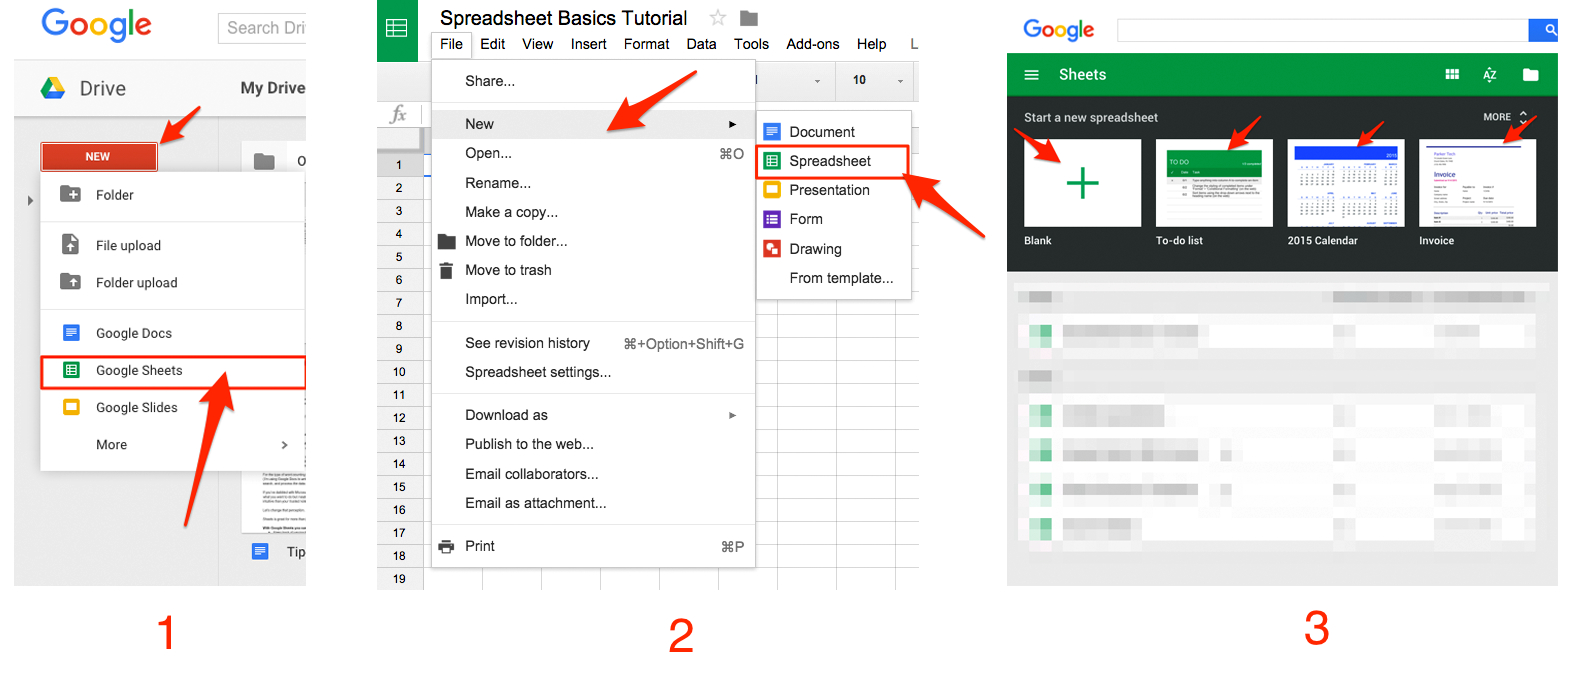 Google Sheets 101: The Beginner's Guide To Online Spreadsheets - The Within Components Of A Spreadsheet